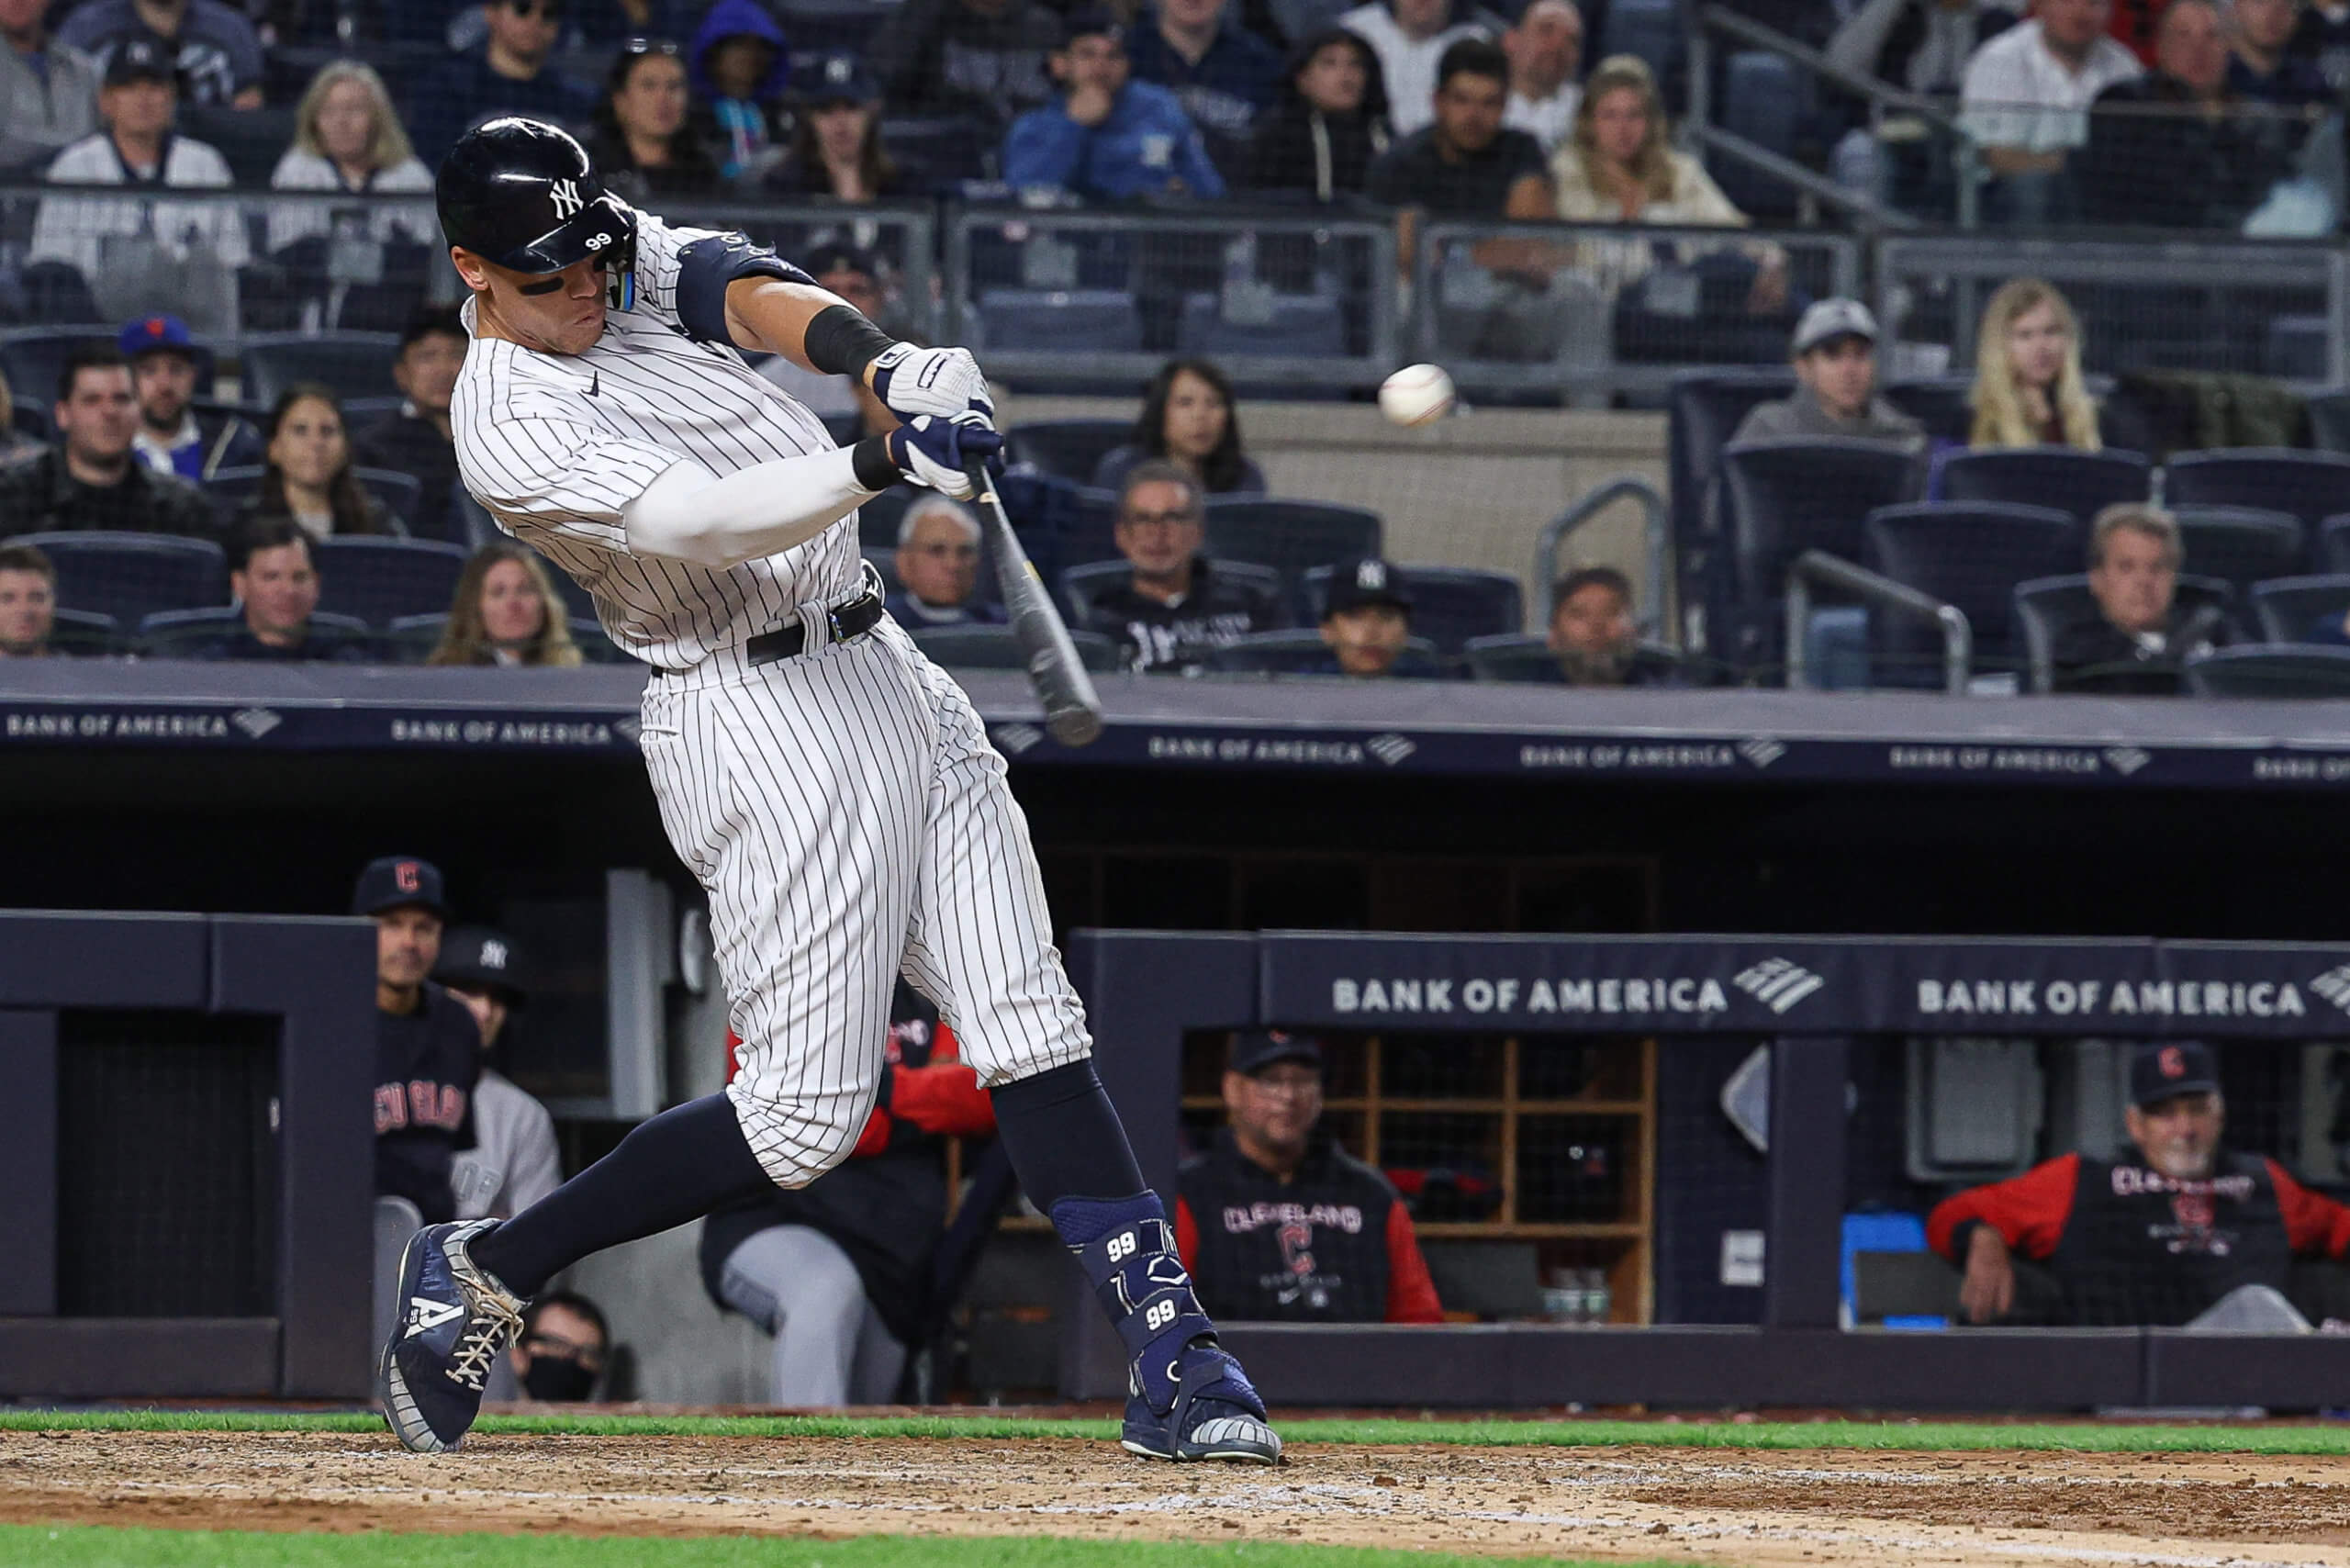 Want to see Giants dancing on home plate? Chasing Aaron Judge can